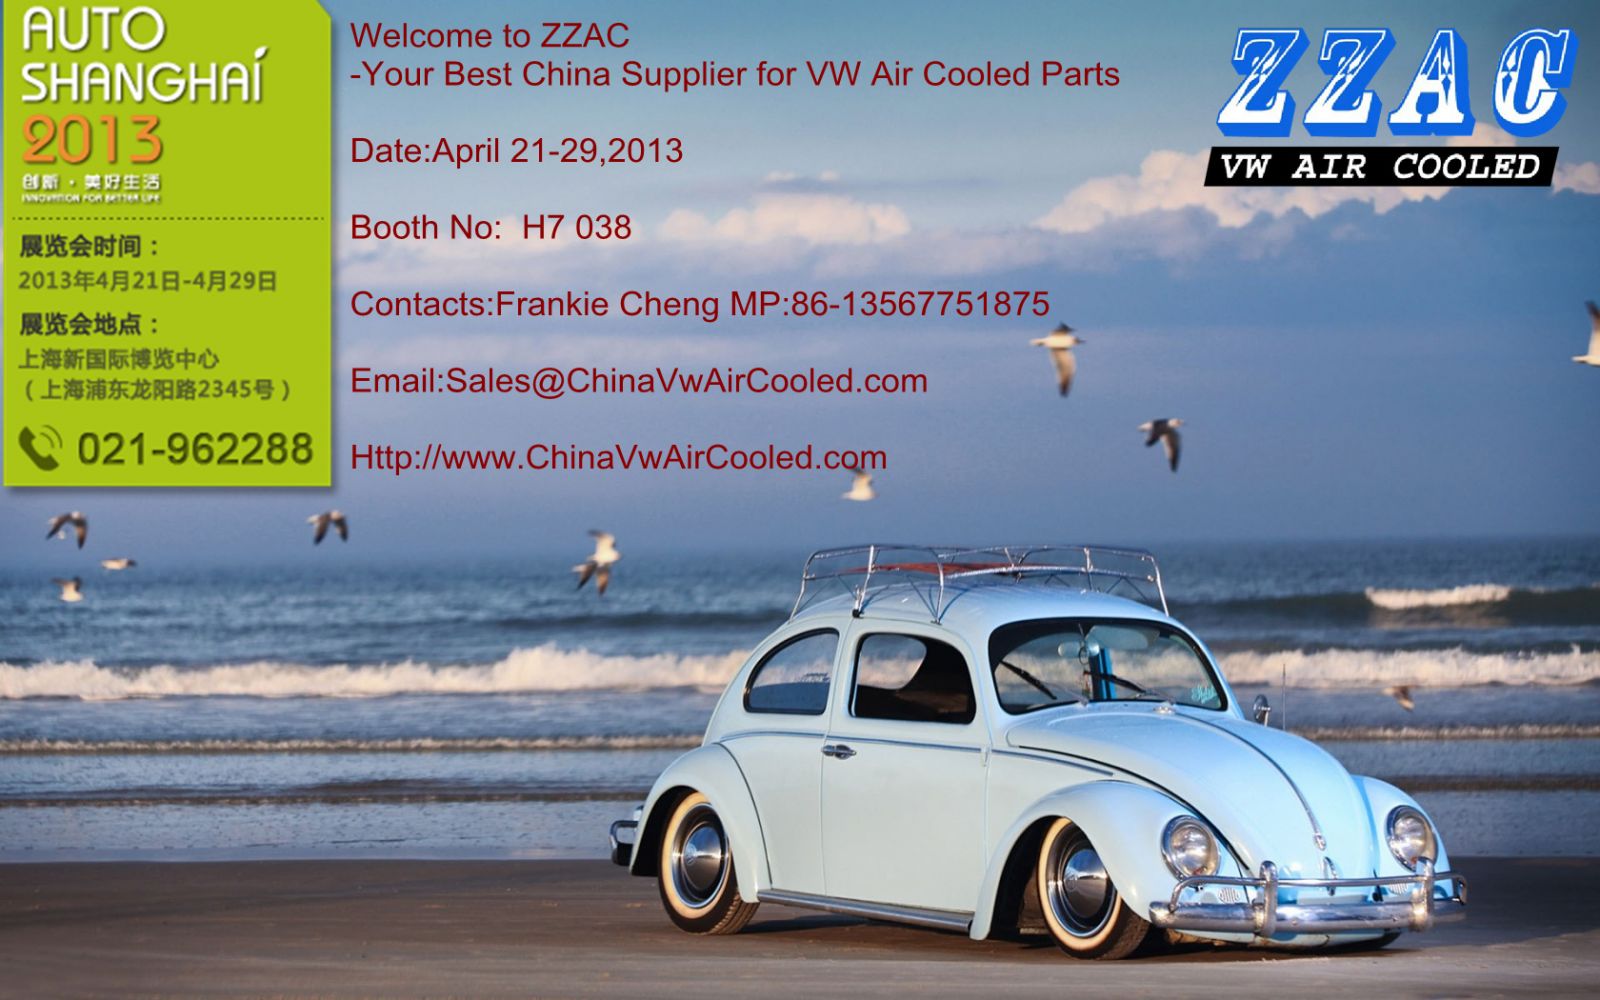 ZZAC Meeting you at Auto Shanghai 2013